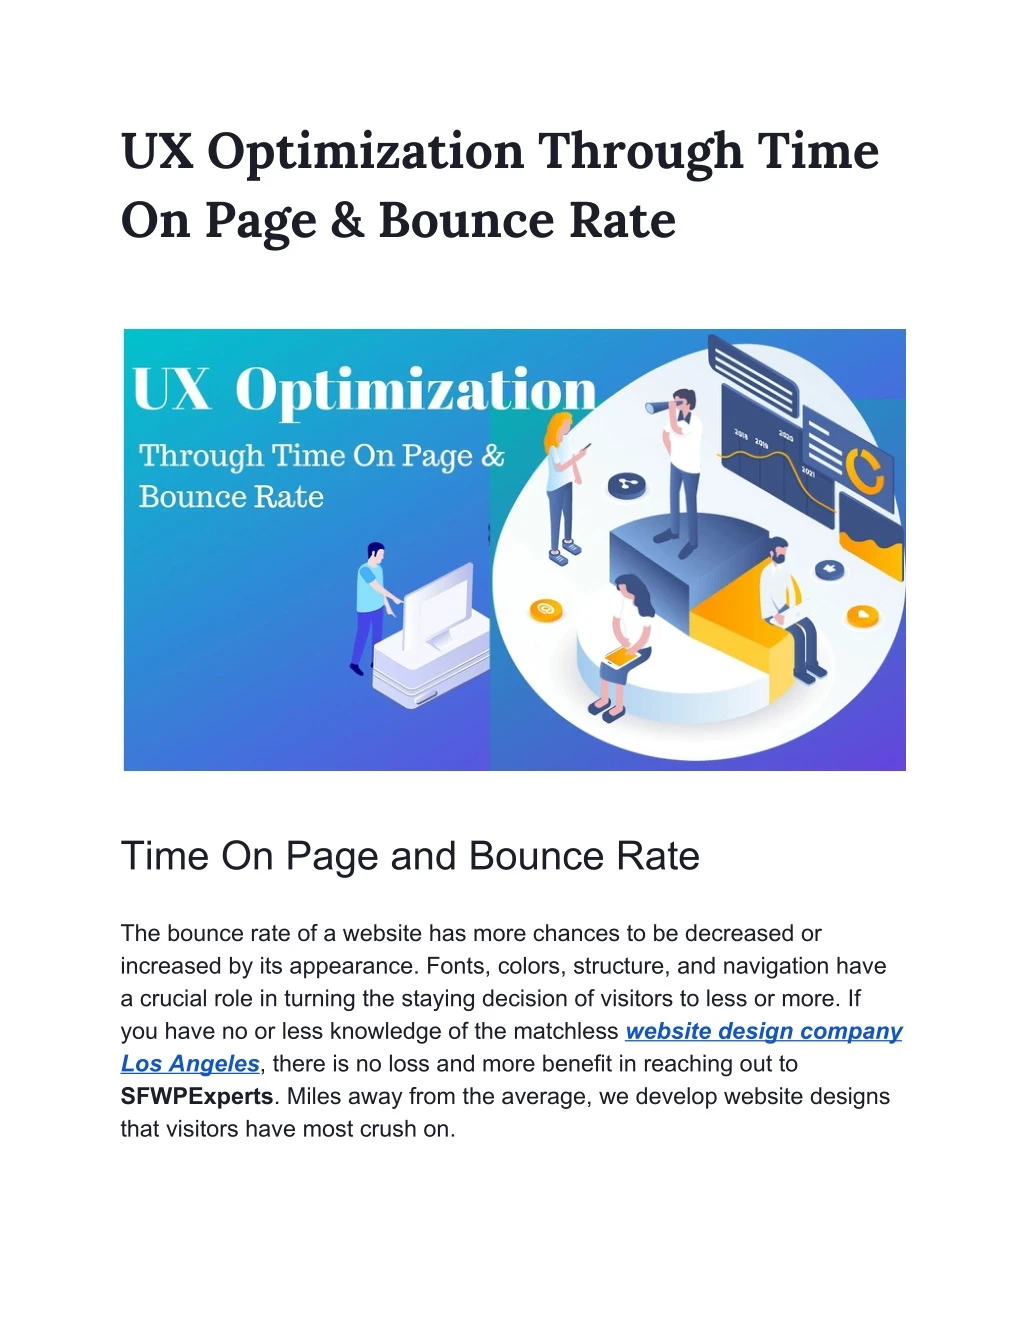 ux optimization through time on page bounce rate